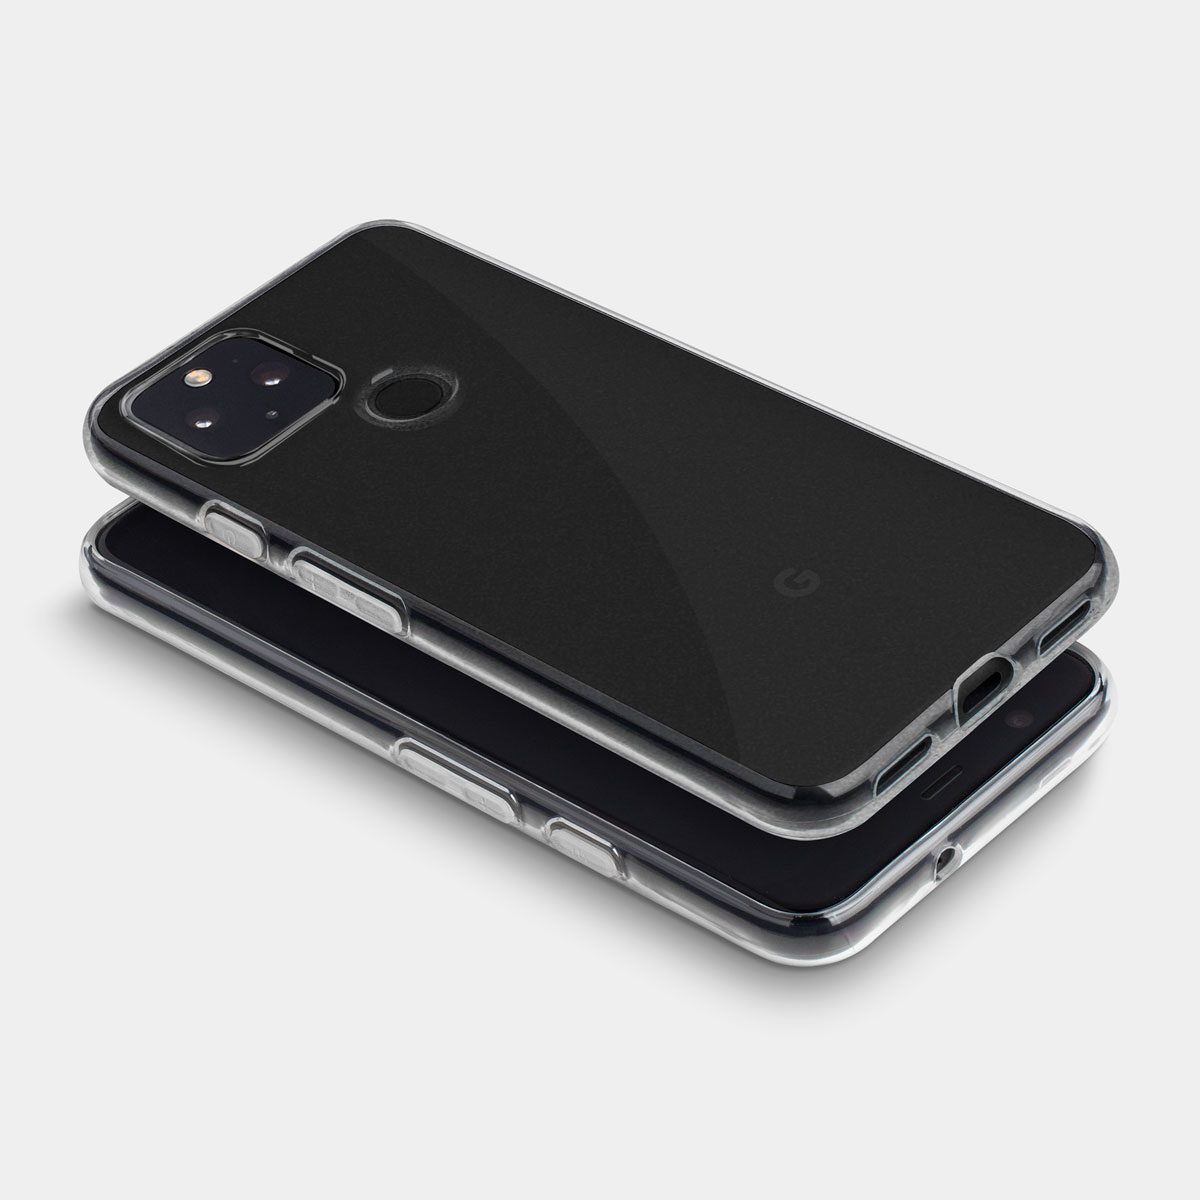 Totallee Pixel 5 Cases Announced 4